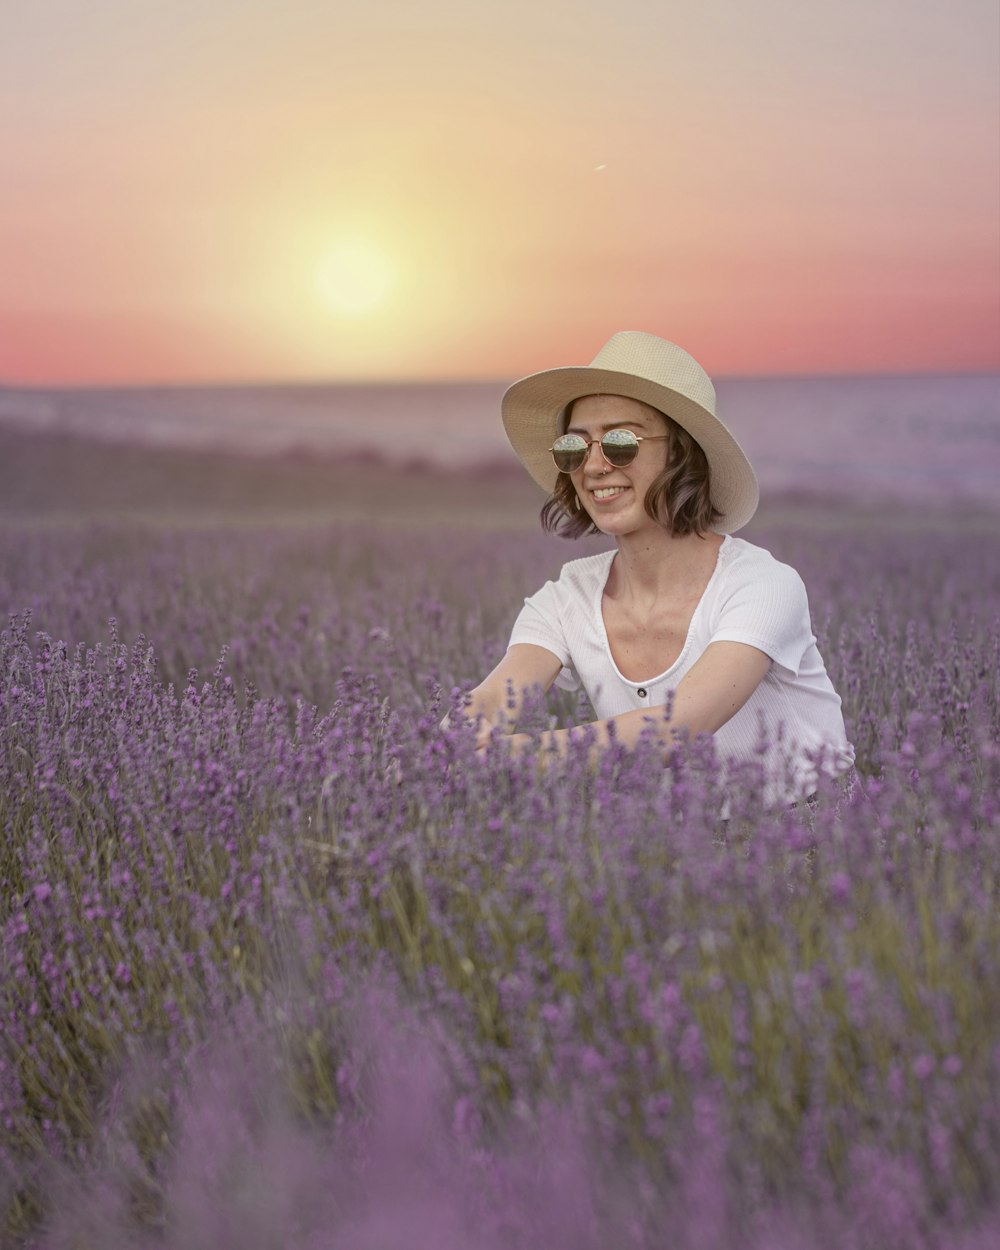 woman in white shirt and brown hat sitting on purple flower field during daytime